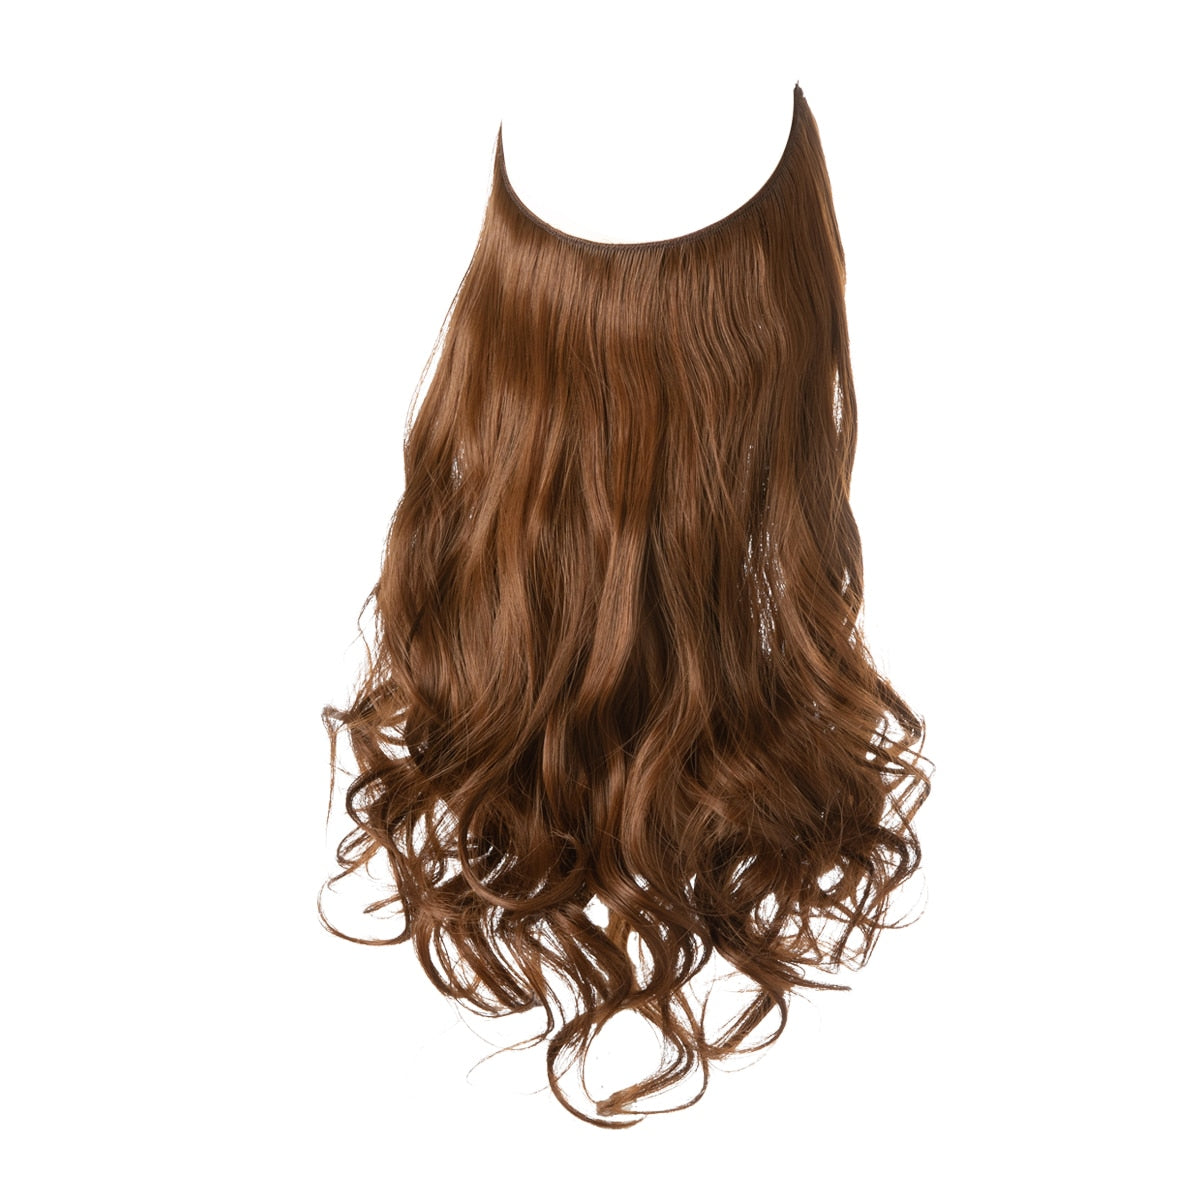 TEEK - Invisible Synth No Clip No Comb Wave Hair Extensions | Dark Varieties HAIR theteekdotcom Copper Auburn 14inches 